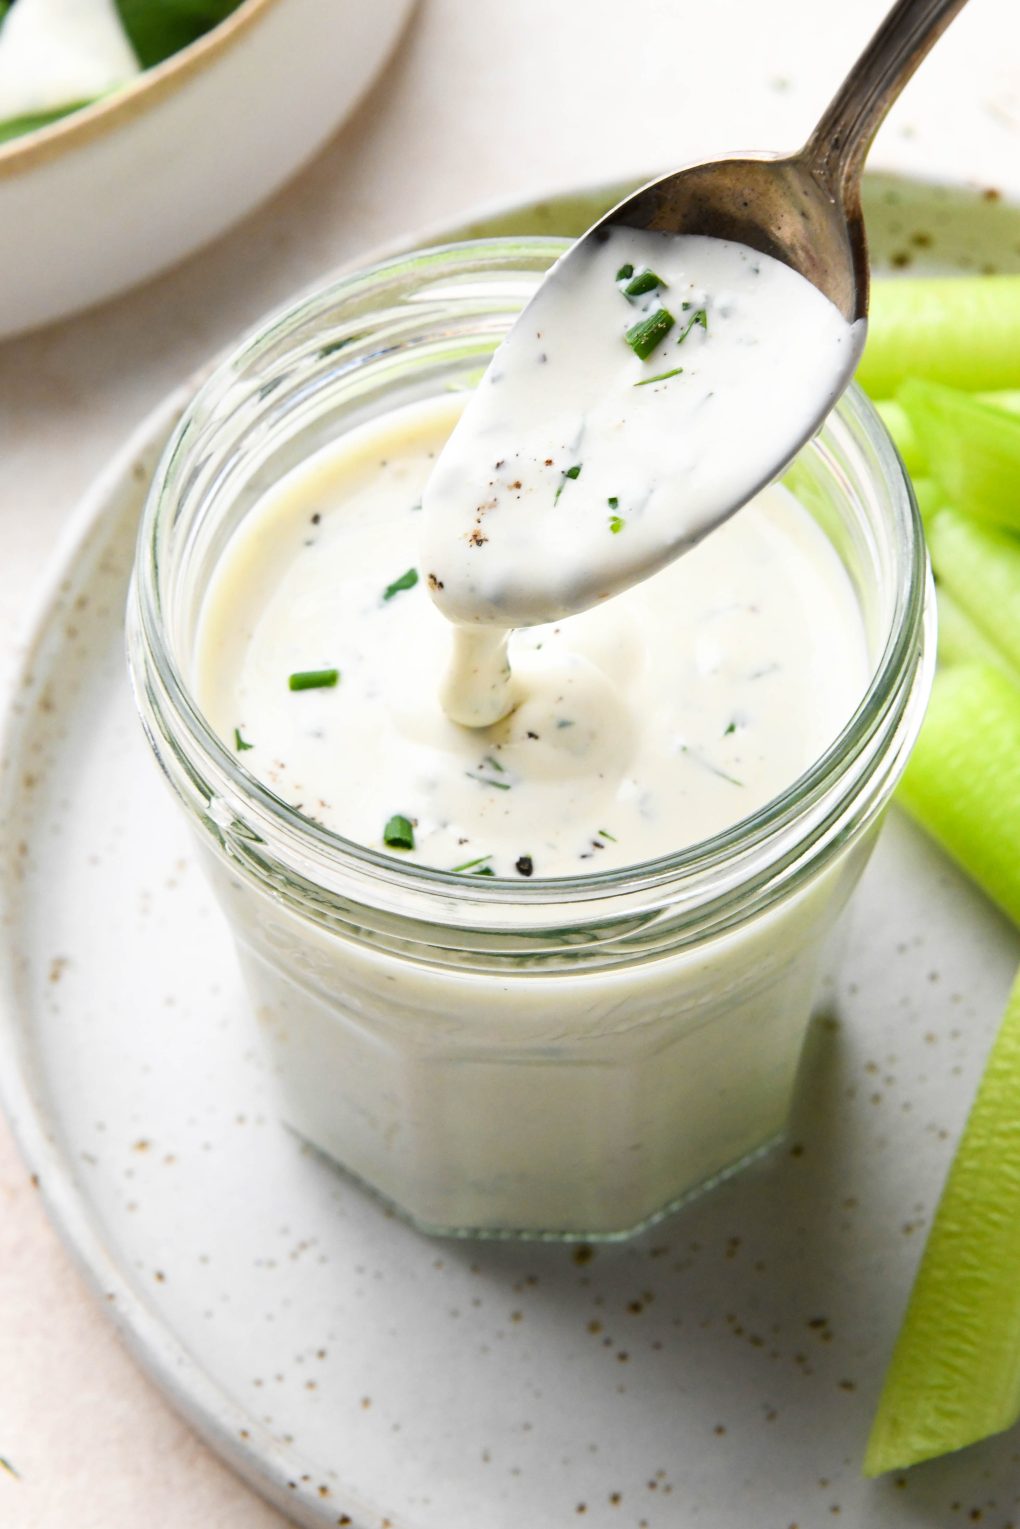 Dairy free ranch dressing in a small glass jar next to celery sticks with a spoon drizzling some of the dressing. On a cream colored background.